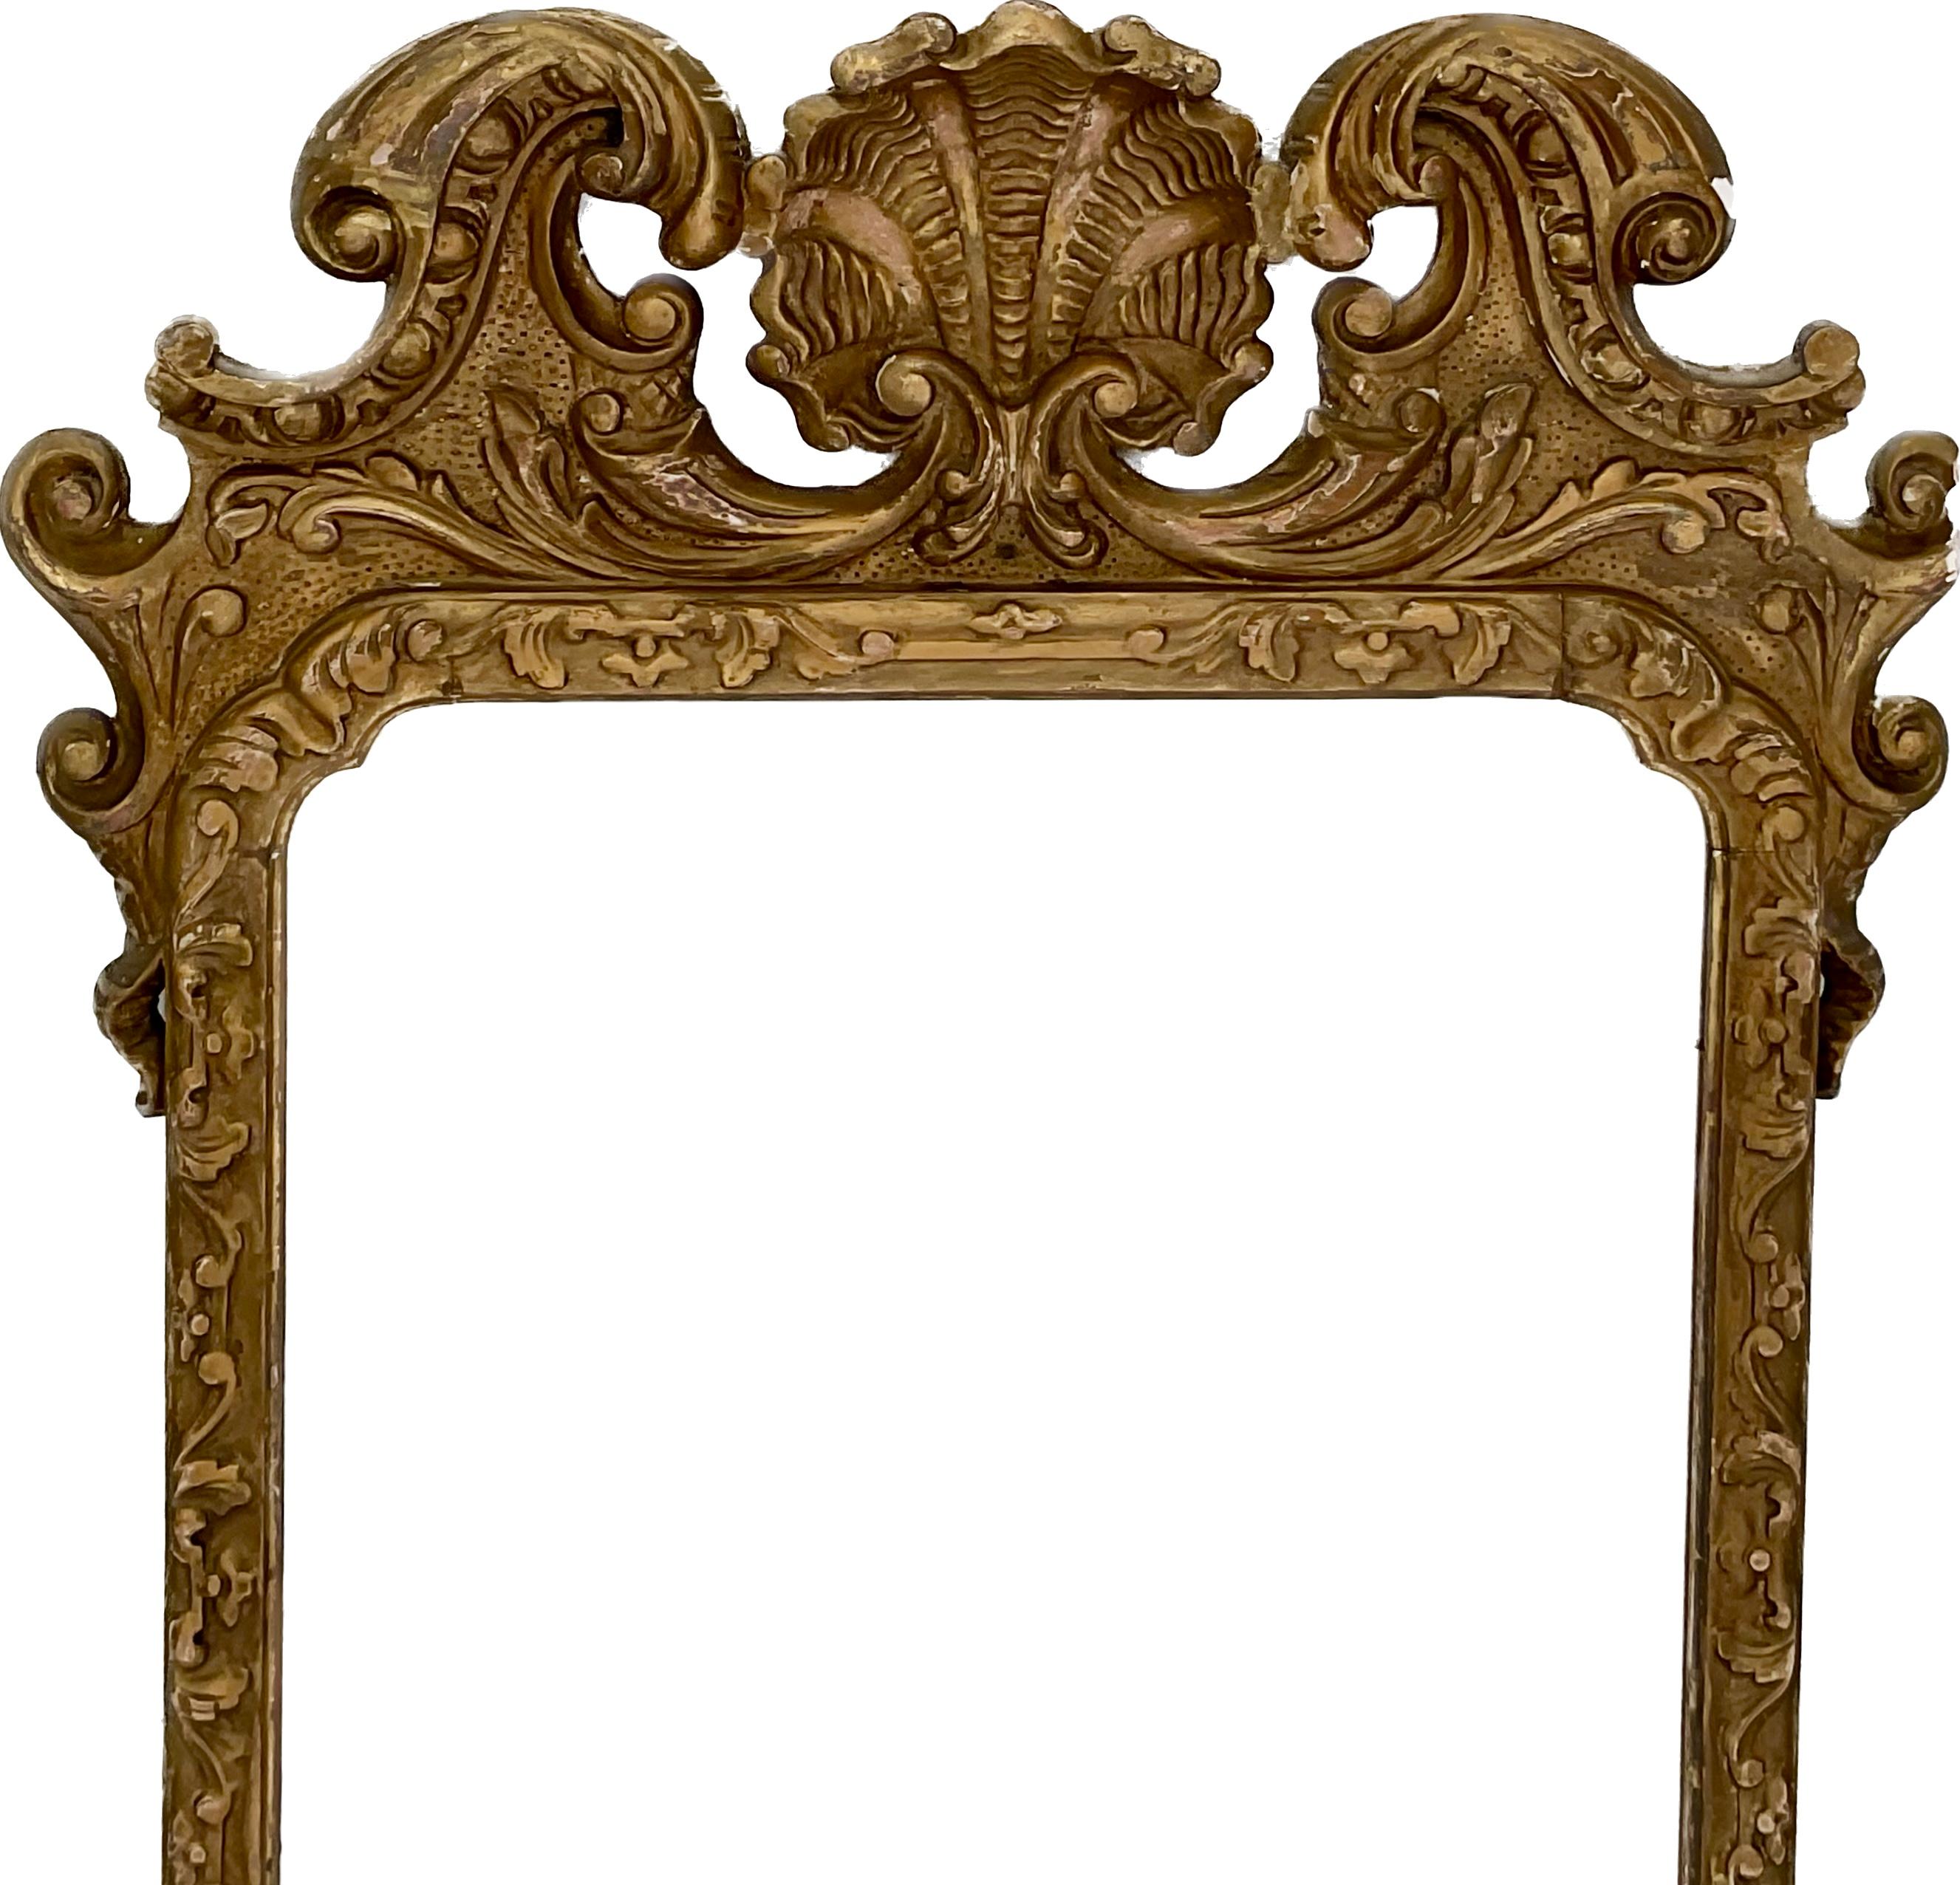 A good English Georgian style gilt wood carved  mirror having a shell and broken arch pediment  crest over beveled mirror plate. Labeled A.W.  Johnson Gilder and Picture frame maker 152 High  Street Kensington. 